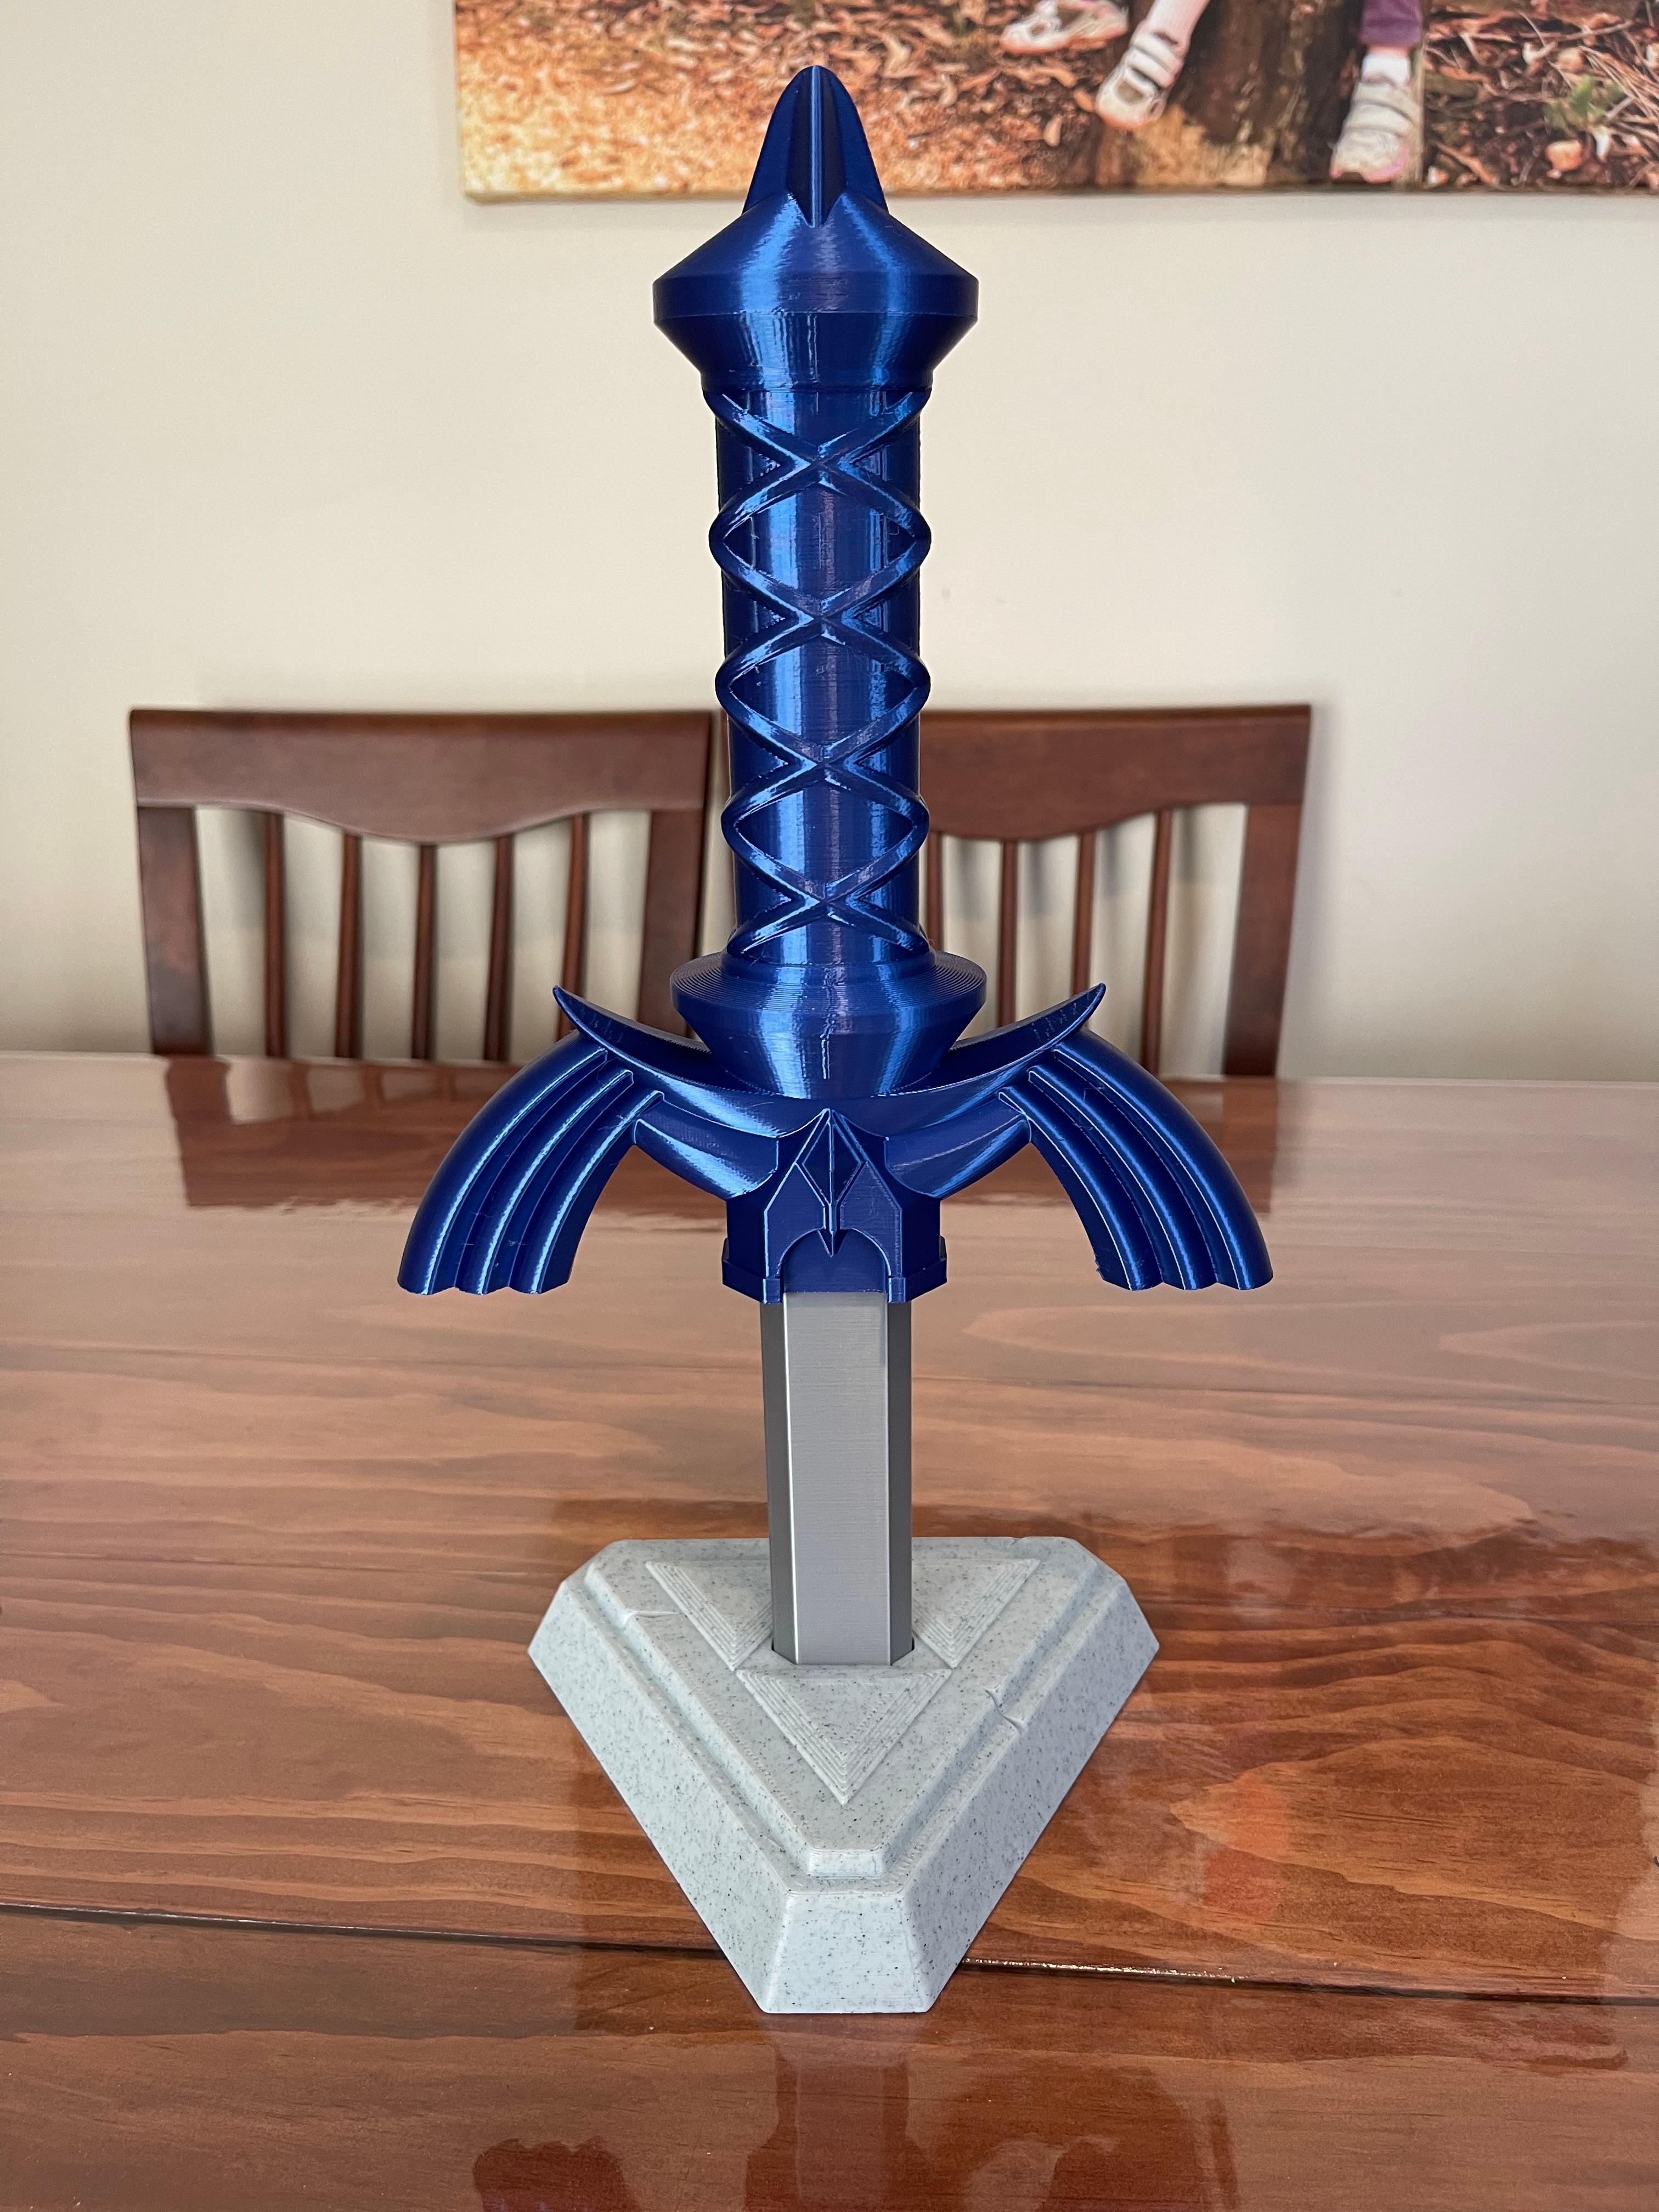 Collapsing Master Sword with Replaceable Blade - As soon as I finished assembling the sword, I just knew the perfect way to display it! Hopped on Tinkercad and knocked up a BOTW-inspired pedestal from a few other files. - 3d model